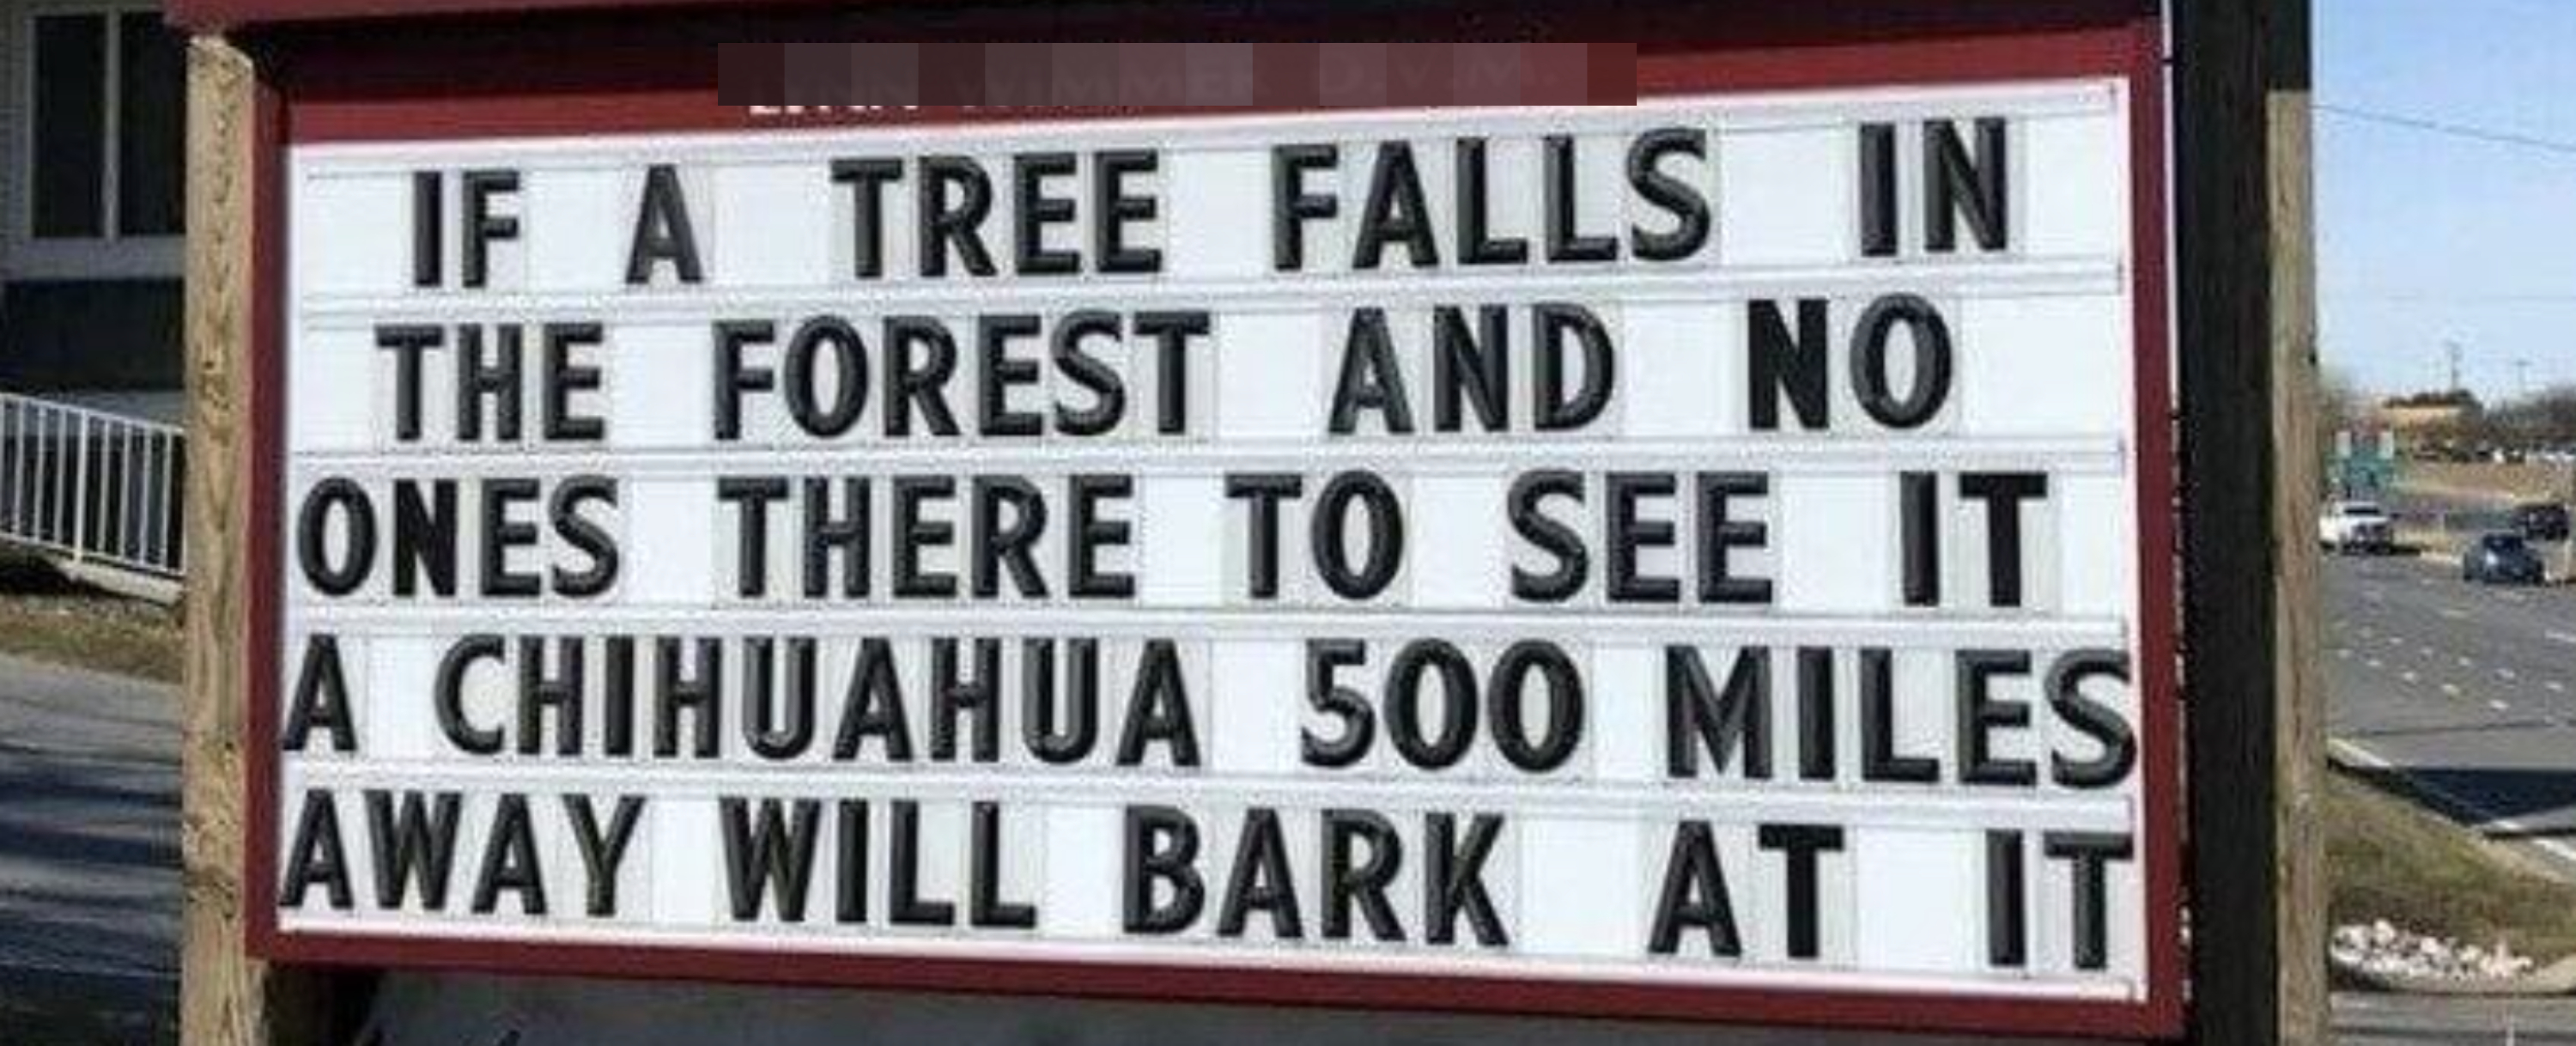 Sign with humorous saying: &#x27;If a tree falls in the forest and no one&#x27;s there to see it, a Chihuahua 500 miles away will bark at it.&#x27;